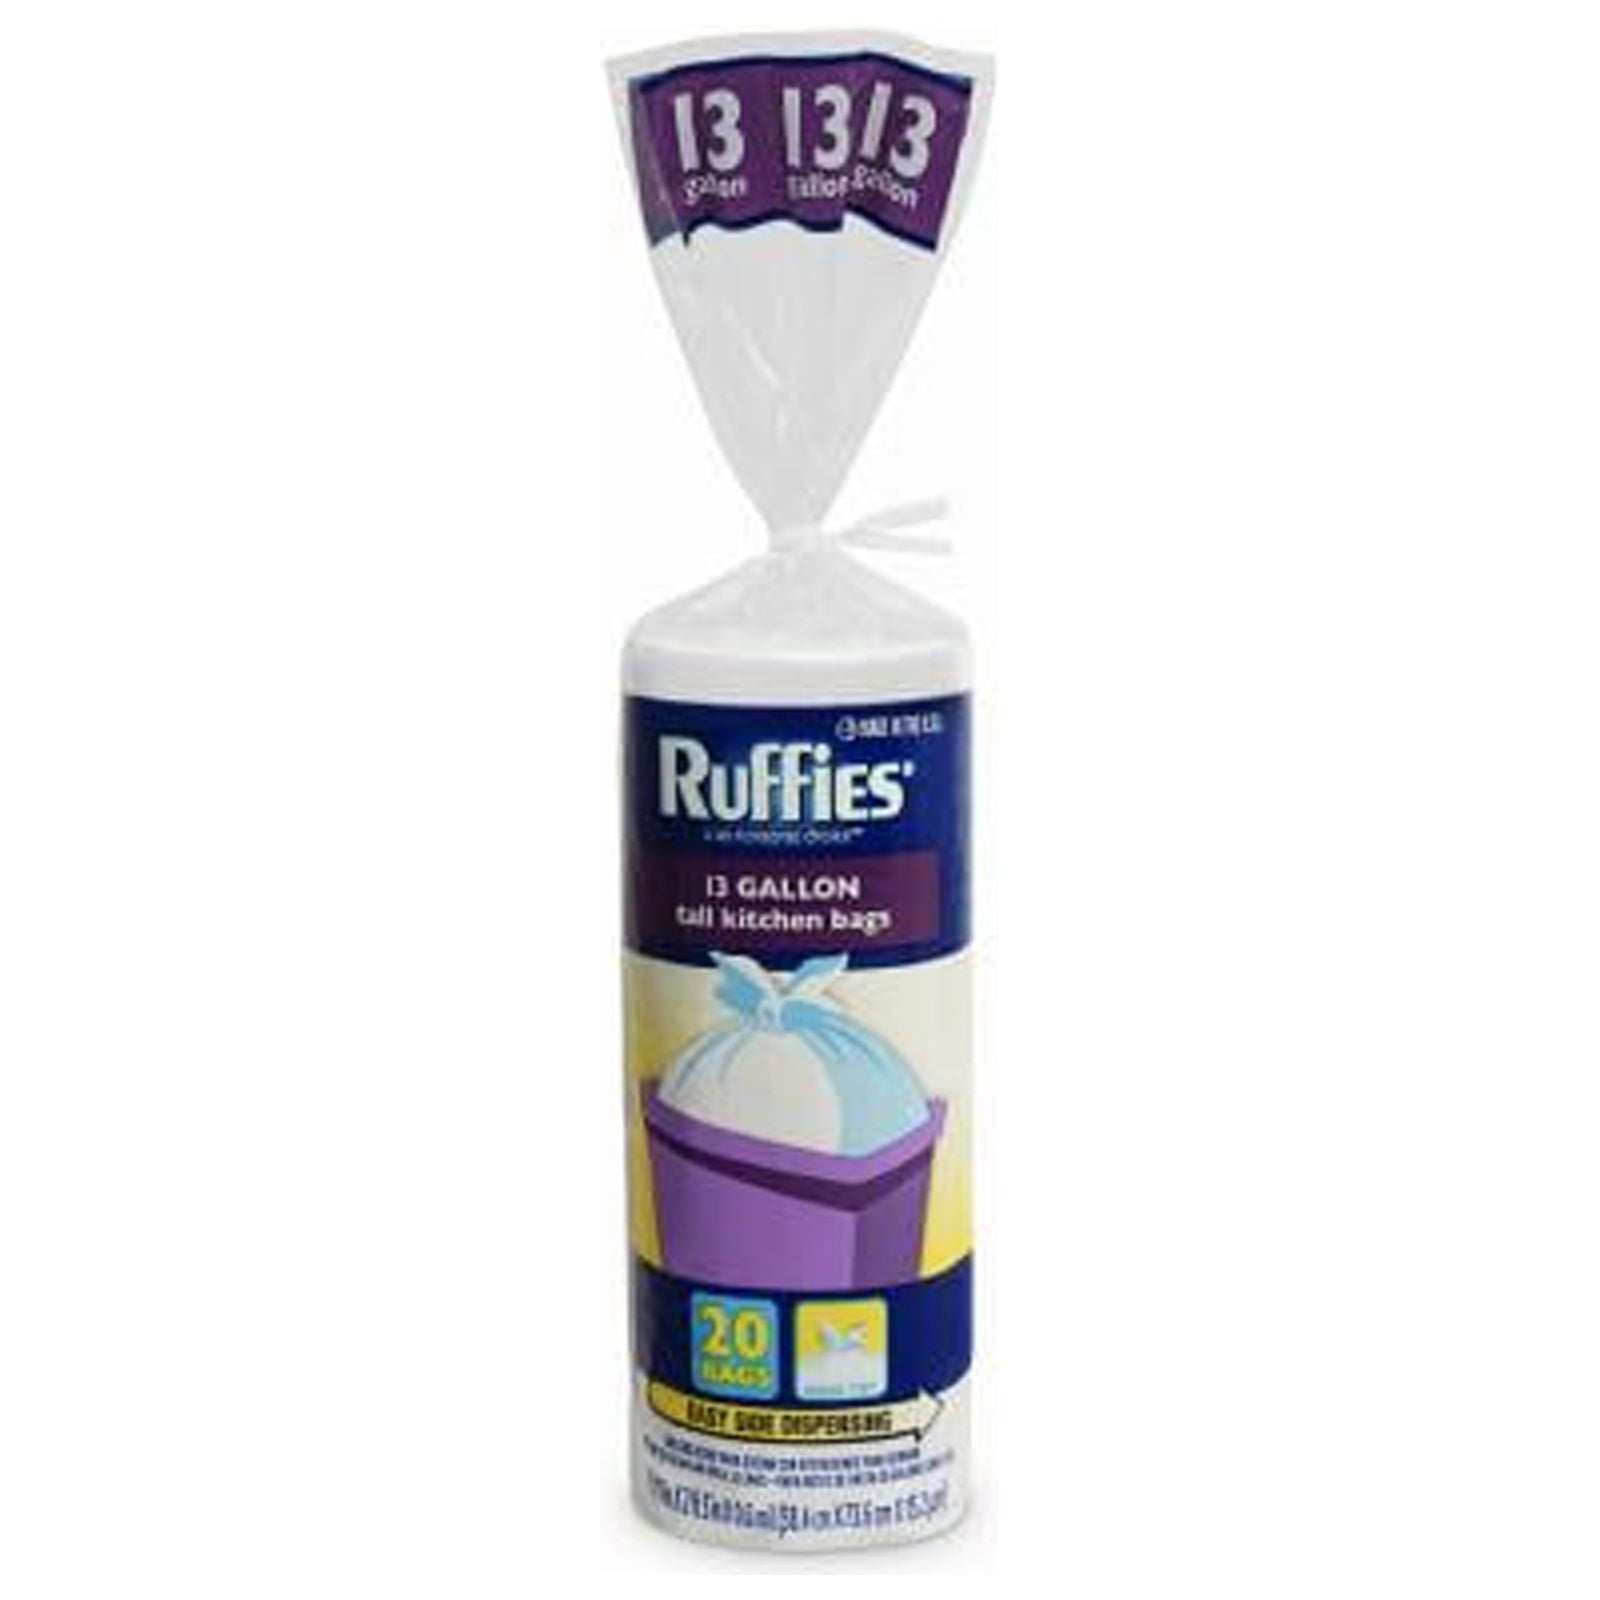 Ruffies Pro Black Wing Ties Trash Bags 33 gal. Capacity 0.75 mil. Thick x  32-1/2 x 38-1/2 in.